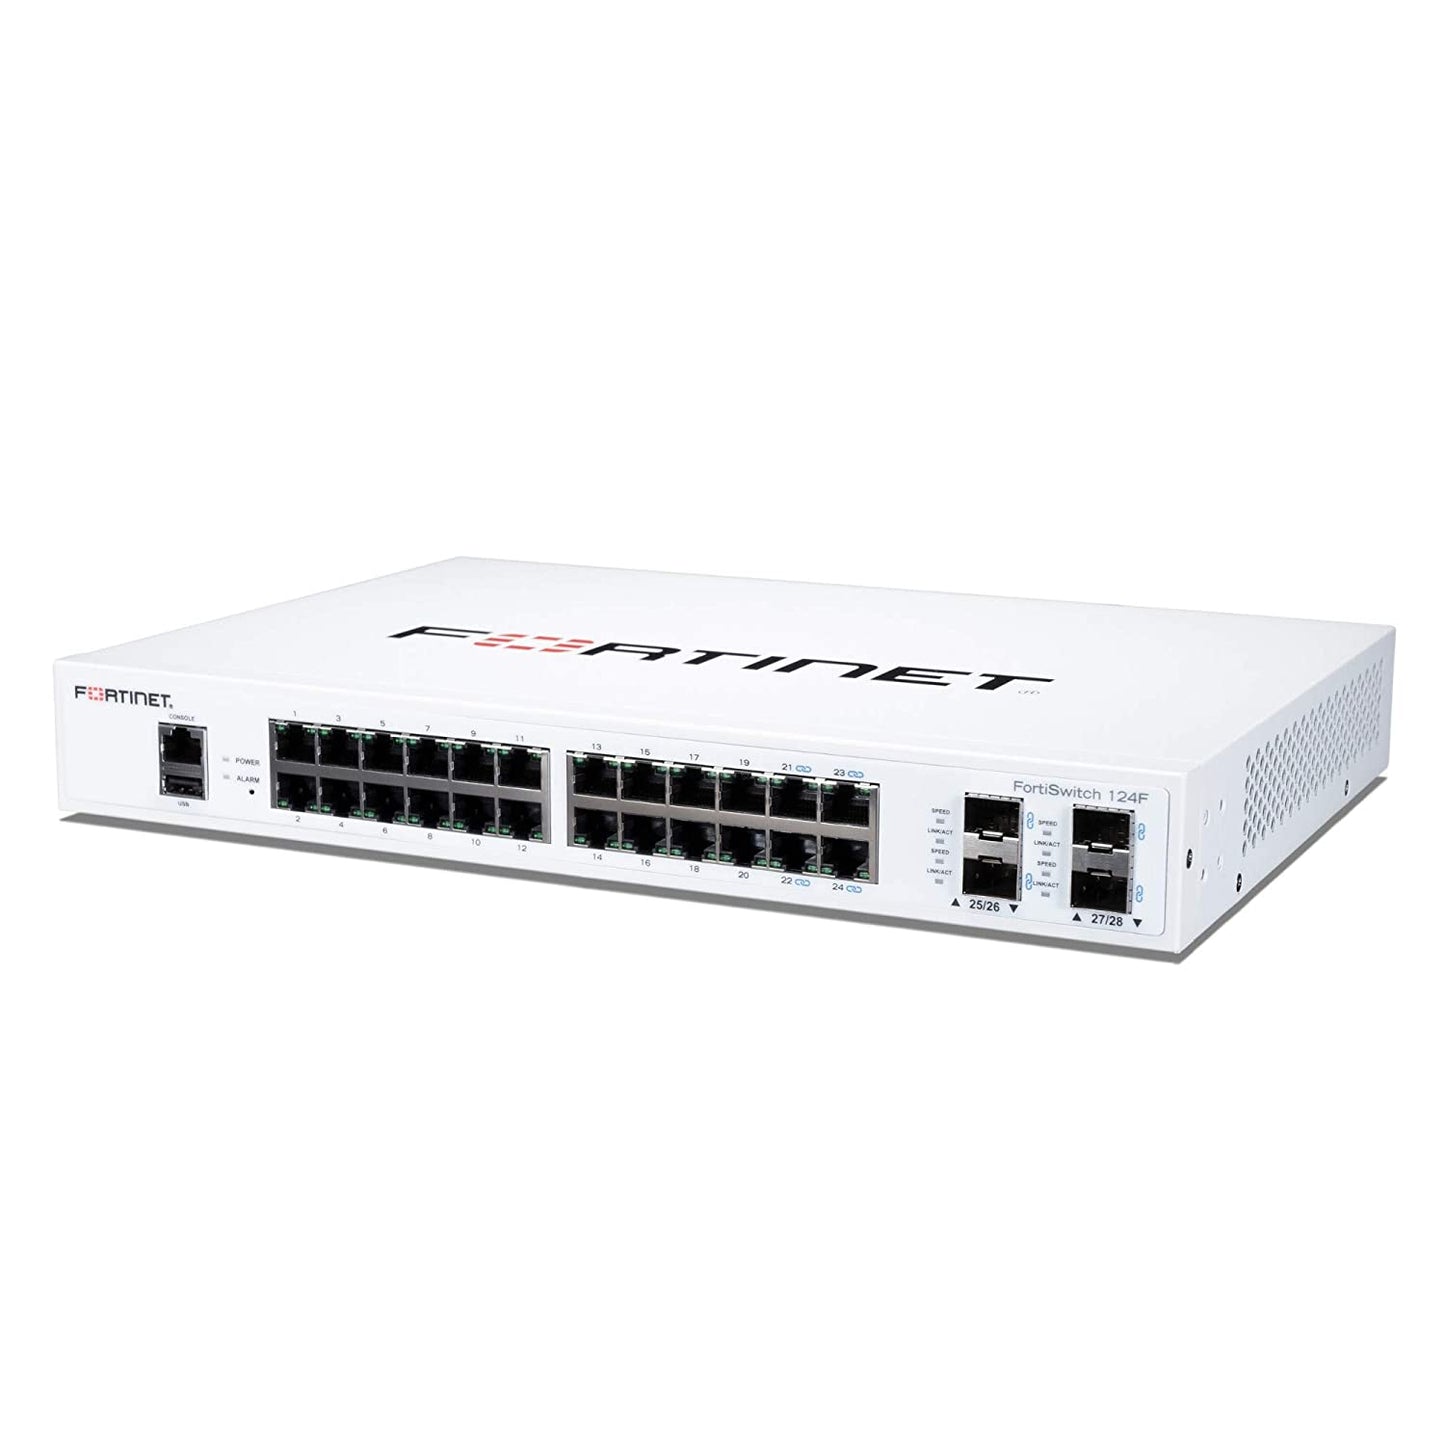 Fortinet FortiSwitch FS-124F Ethernet Switch - 24 Ports